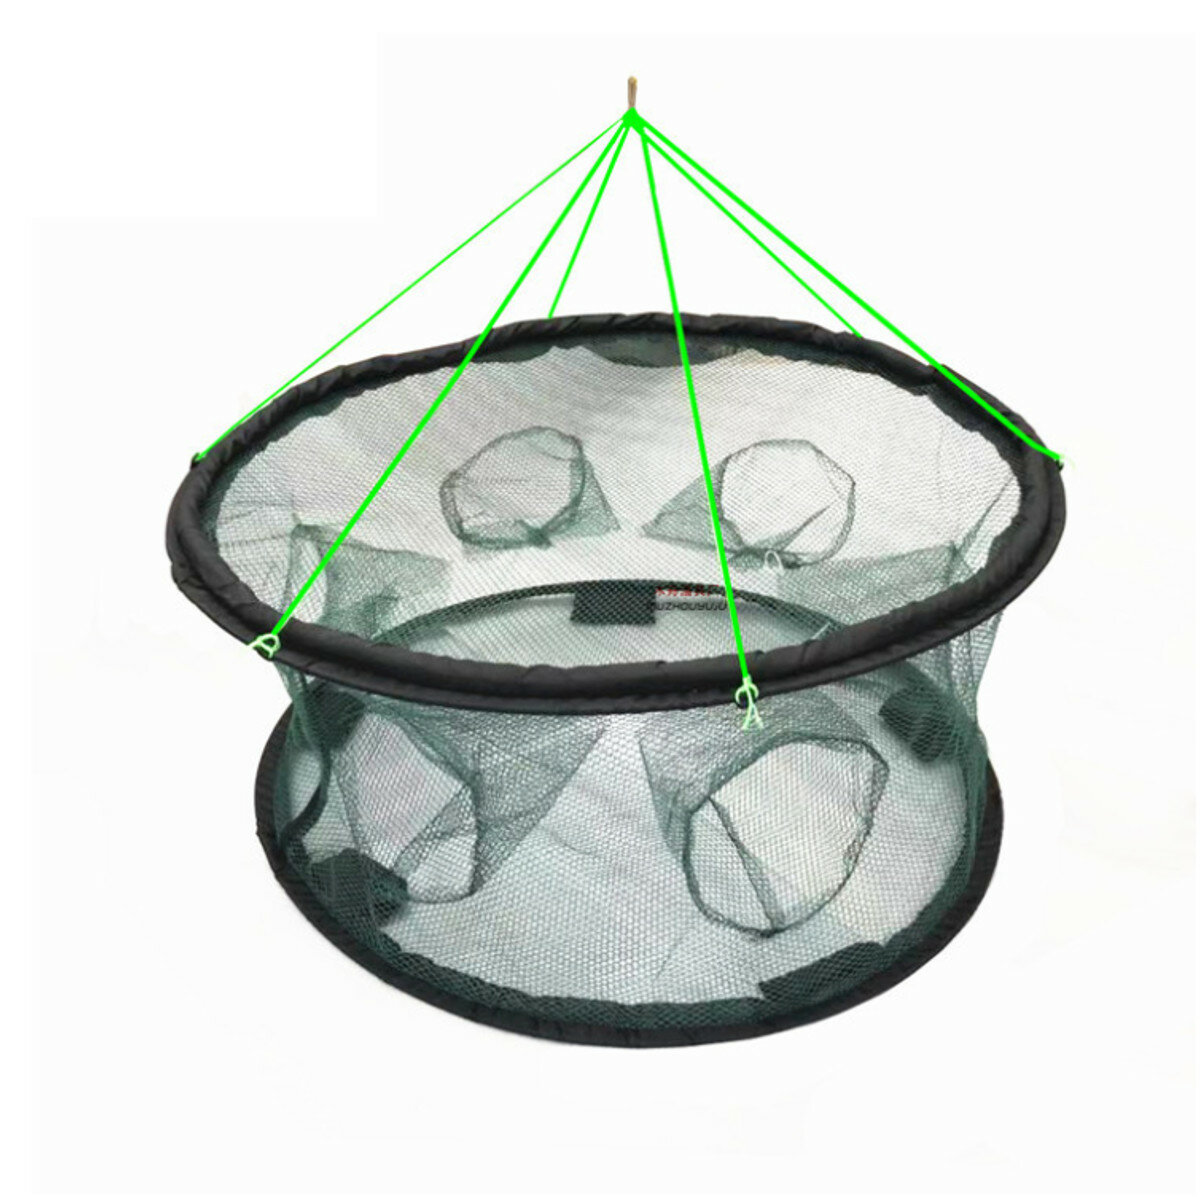 

ZANLURE 6 Holes Foldable Fishing Trap Net Crabs Shrimp Crayfish Lobster Bait Cage Tools Fishing Tools